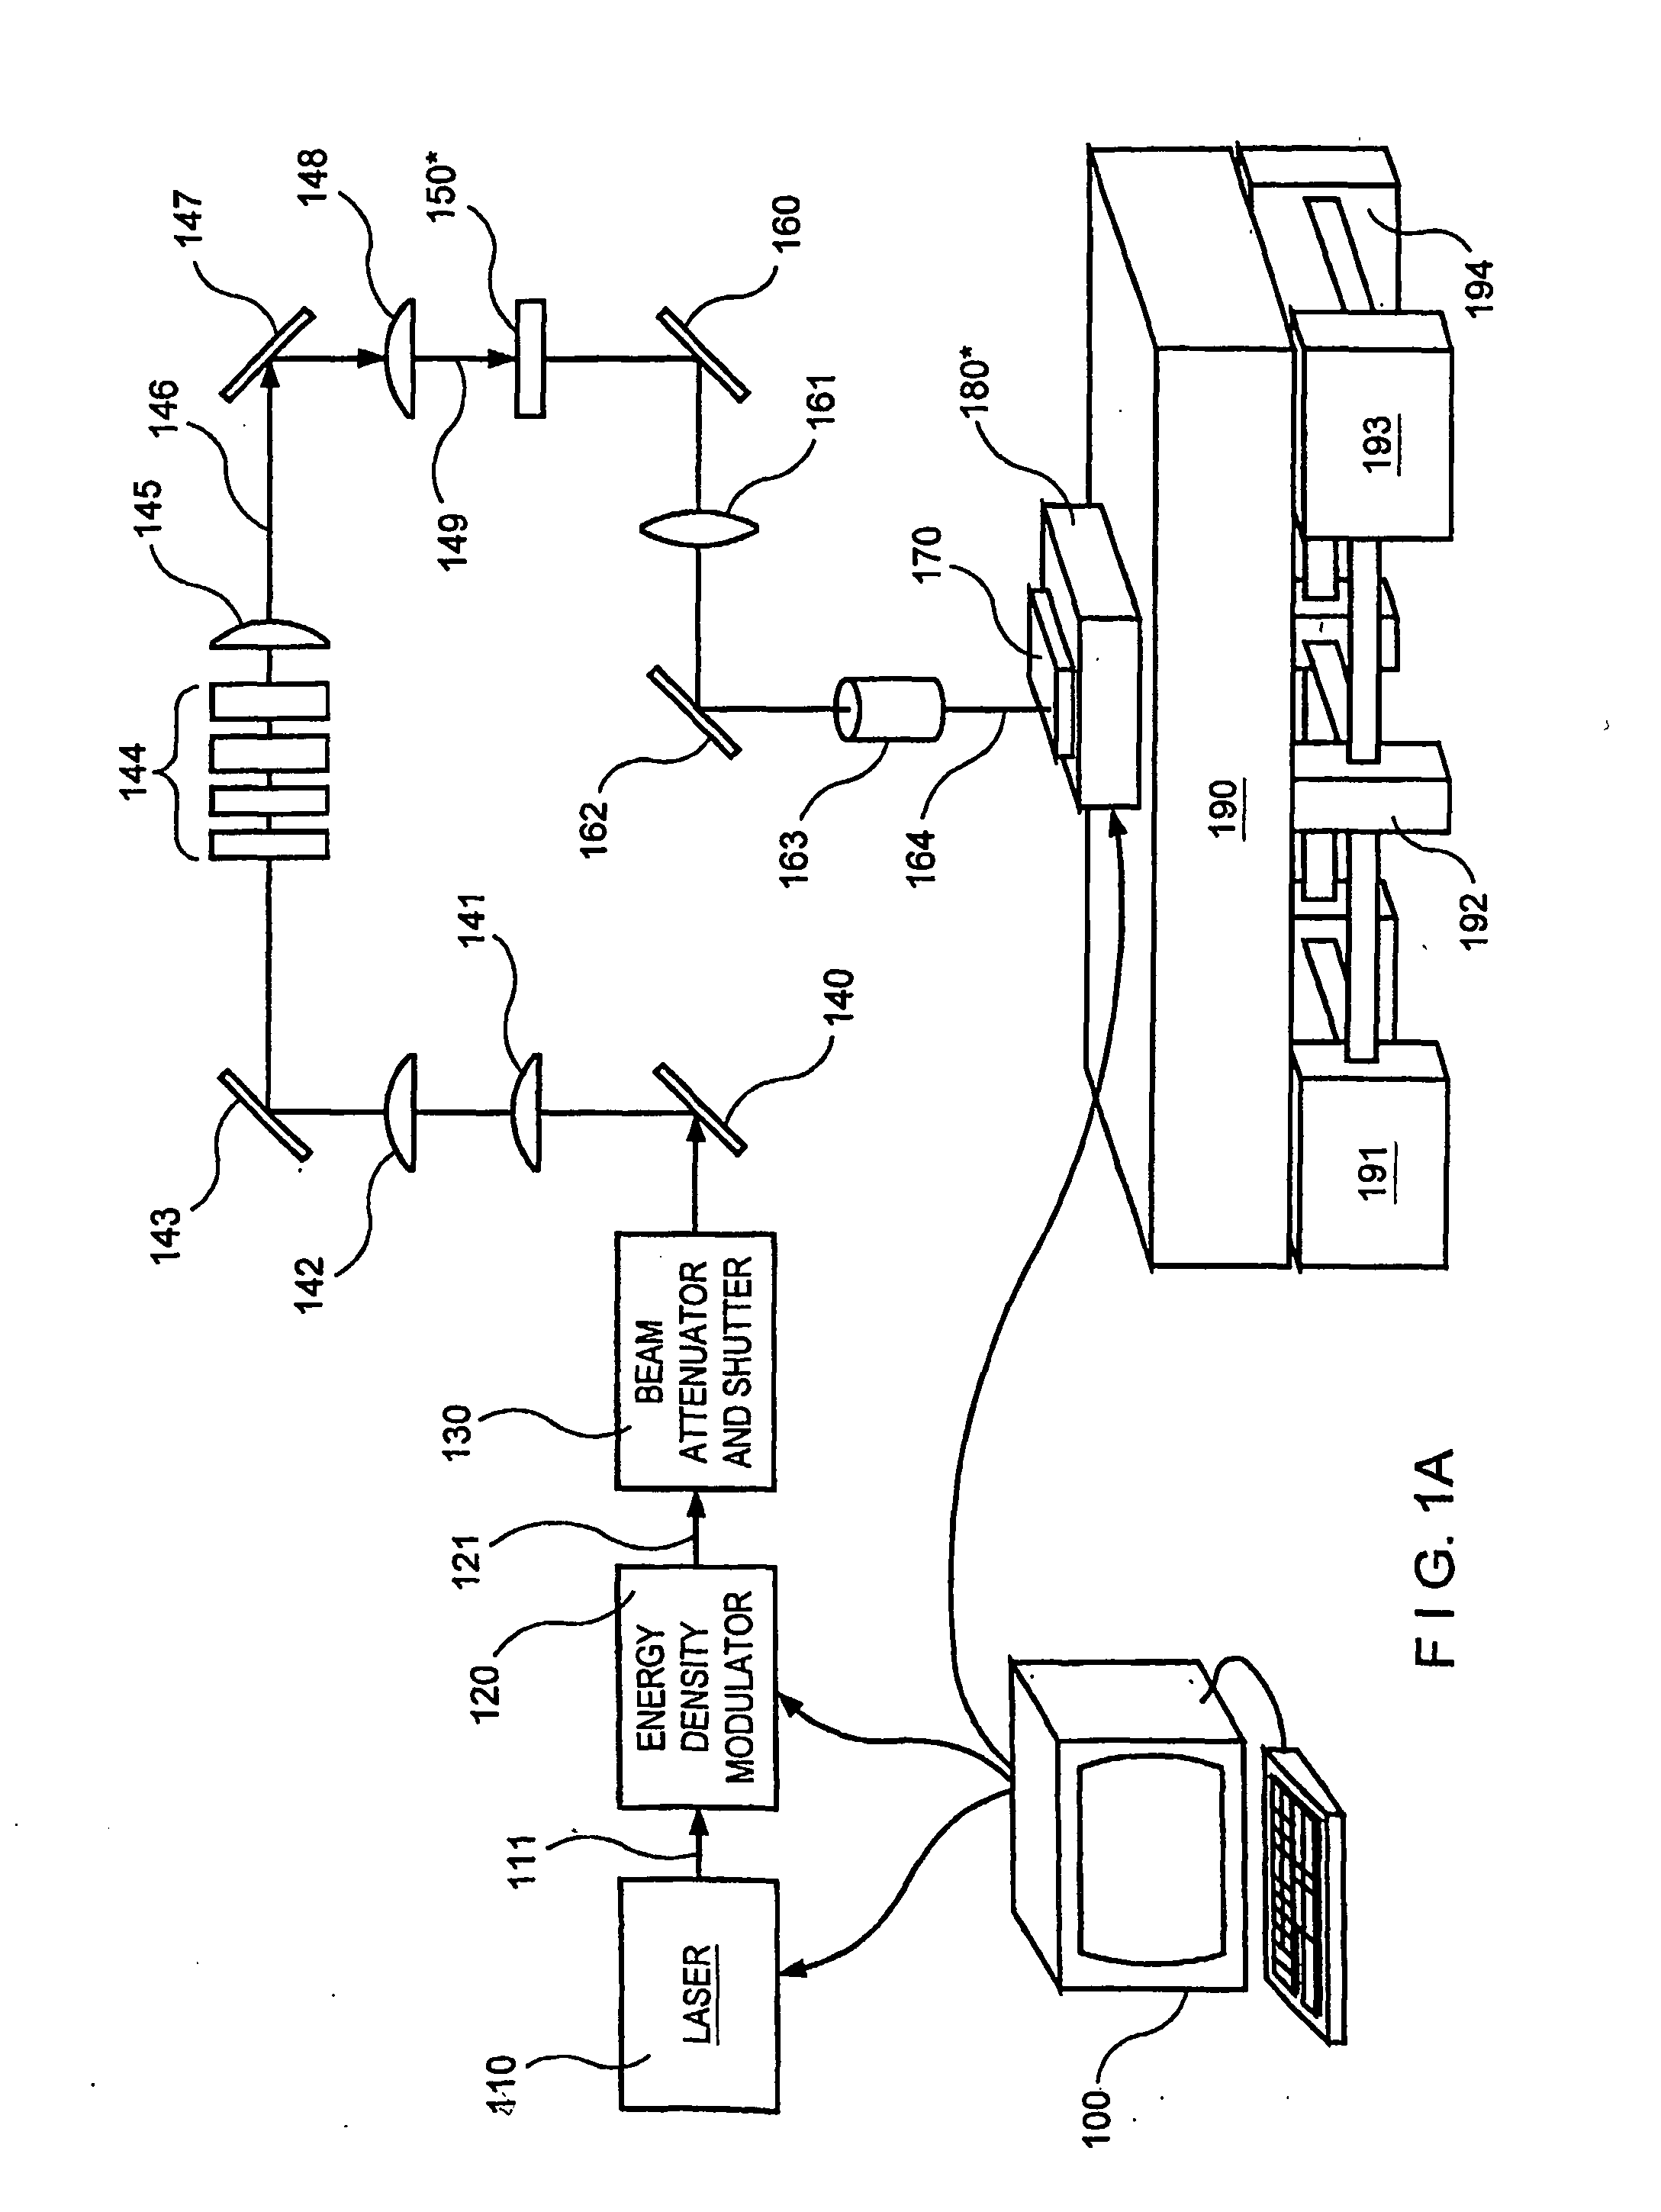 Process and system for laser crystallization processing of film regions on a substrate to provide substantial uniformity within arears in such regions and edge areas thereof, and a structure of film regions